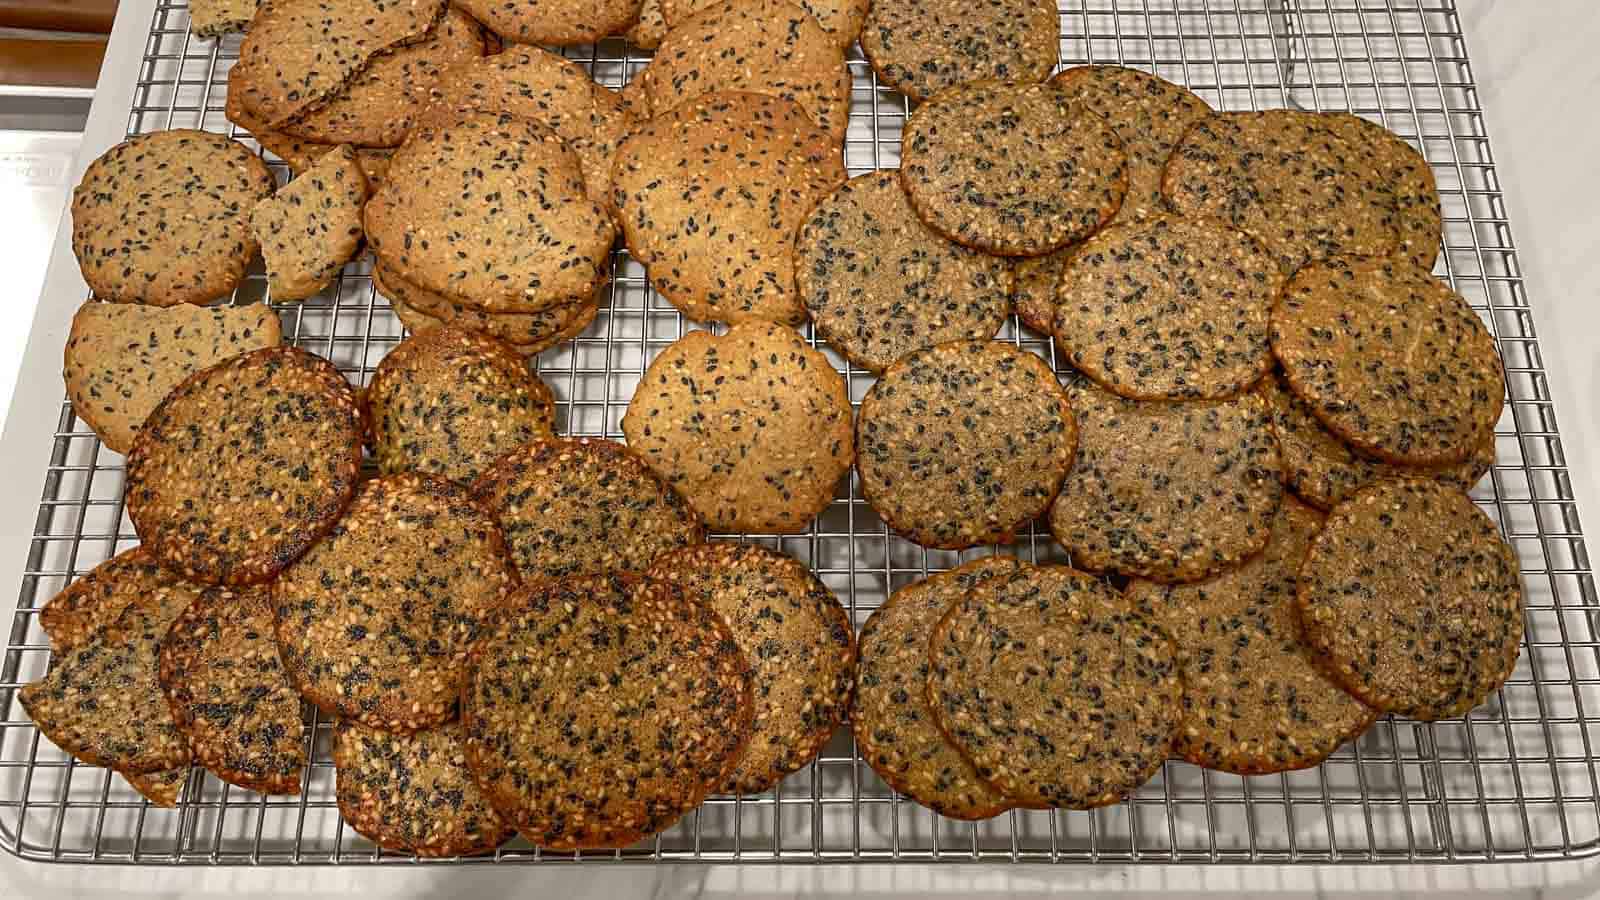 Test batches of sesame cookies